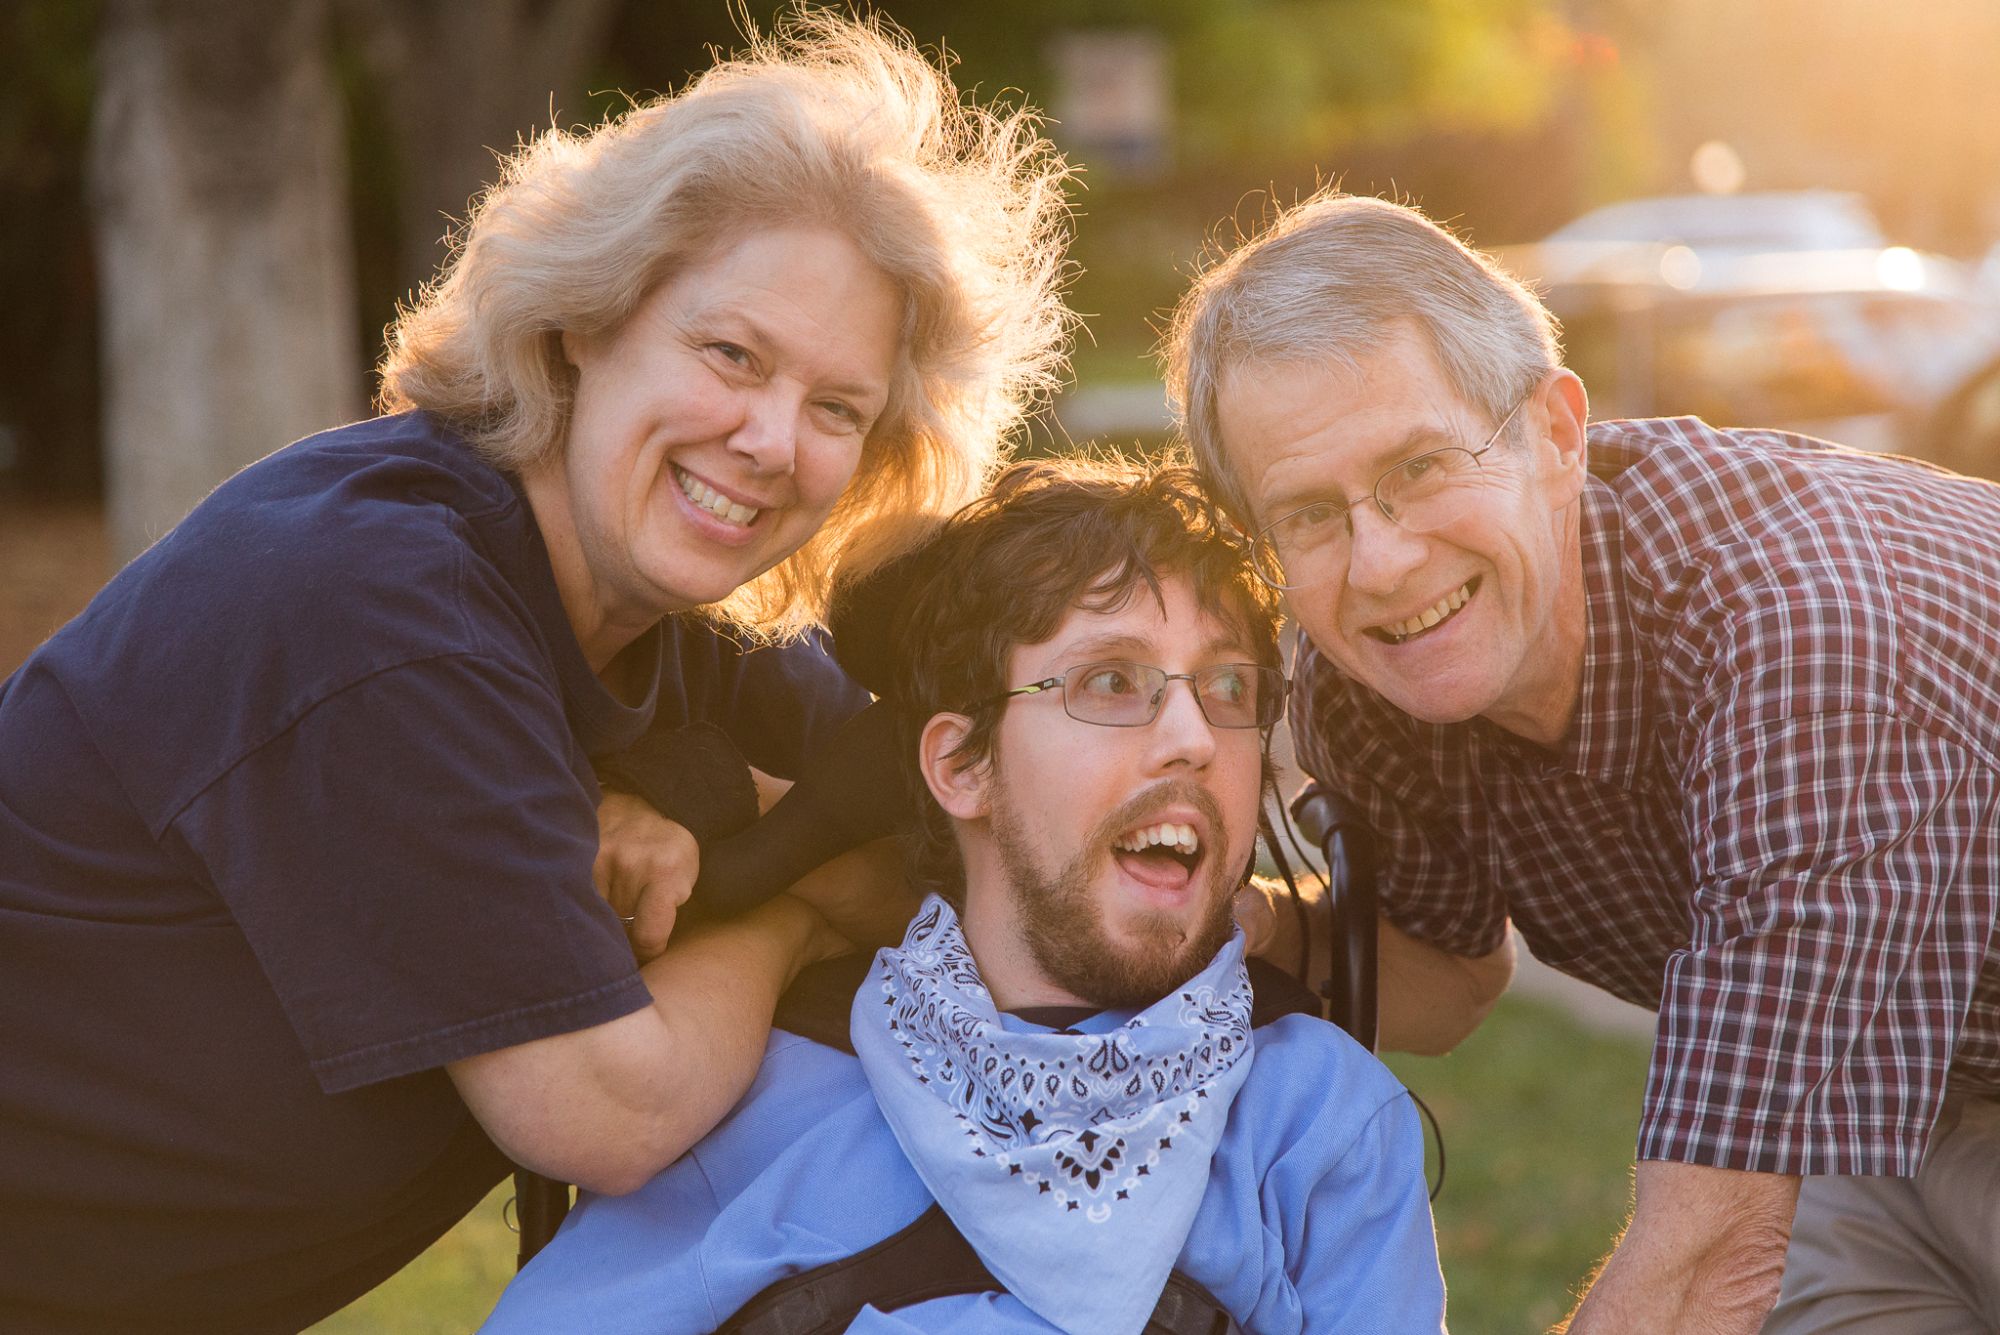 Parents pose with their son who is in a wheelchair on a sidewalk with the sun glowing behind them